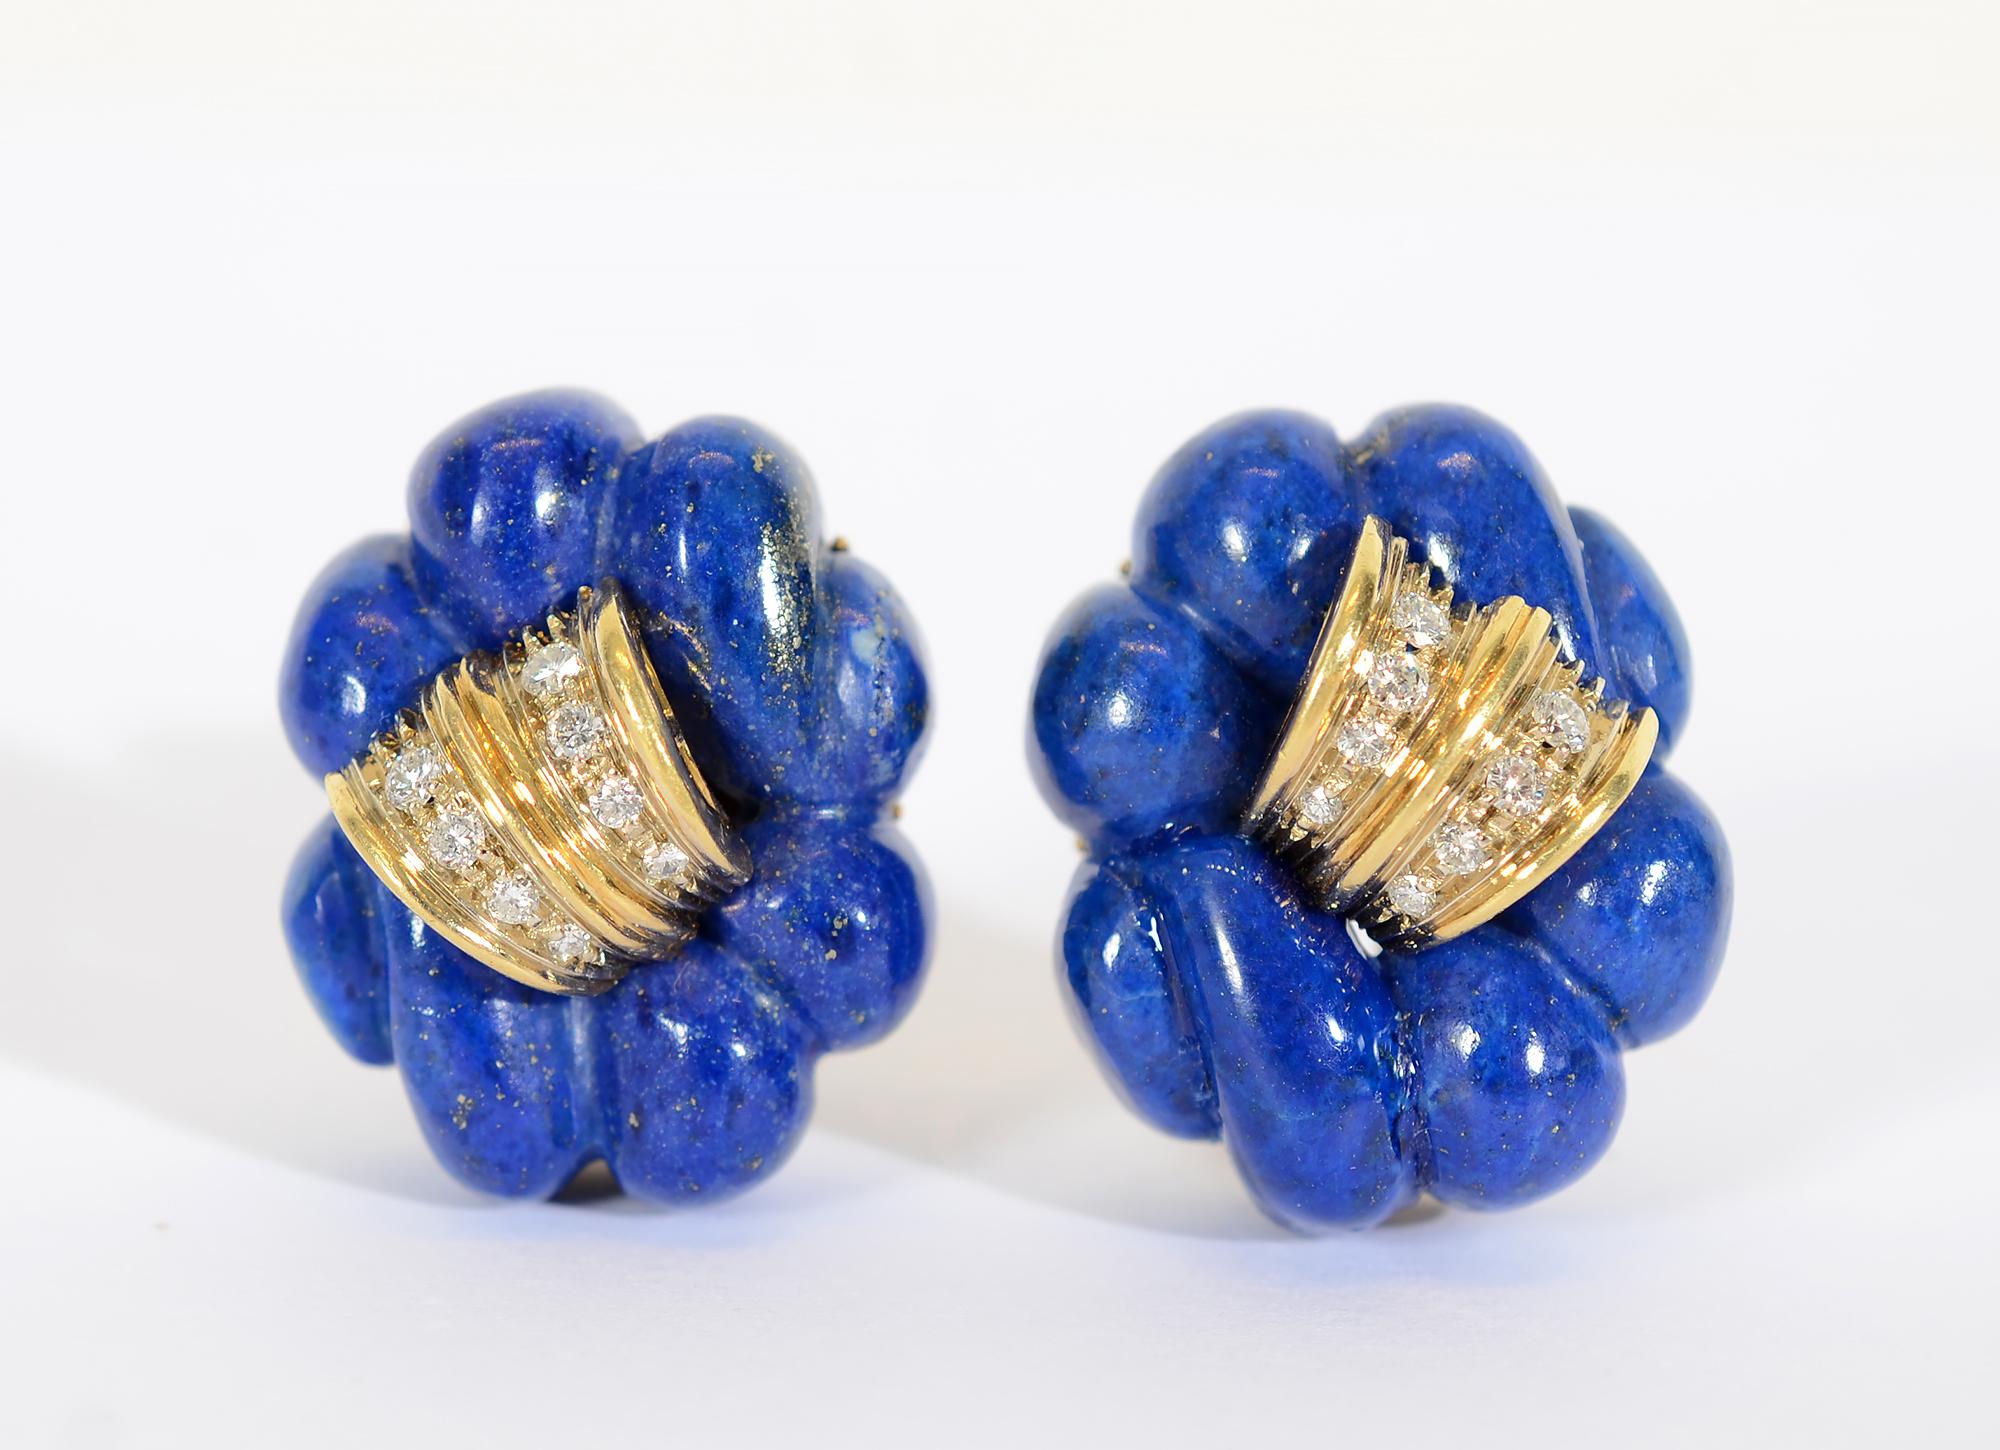 These fabulously sculptural carved lapis lazuli earrings are centered with gold and diamonds. They measure 1 1/16